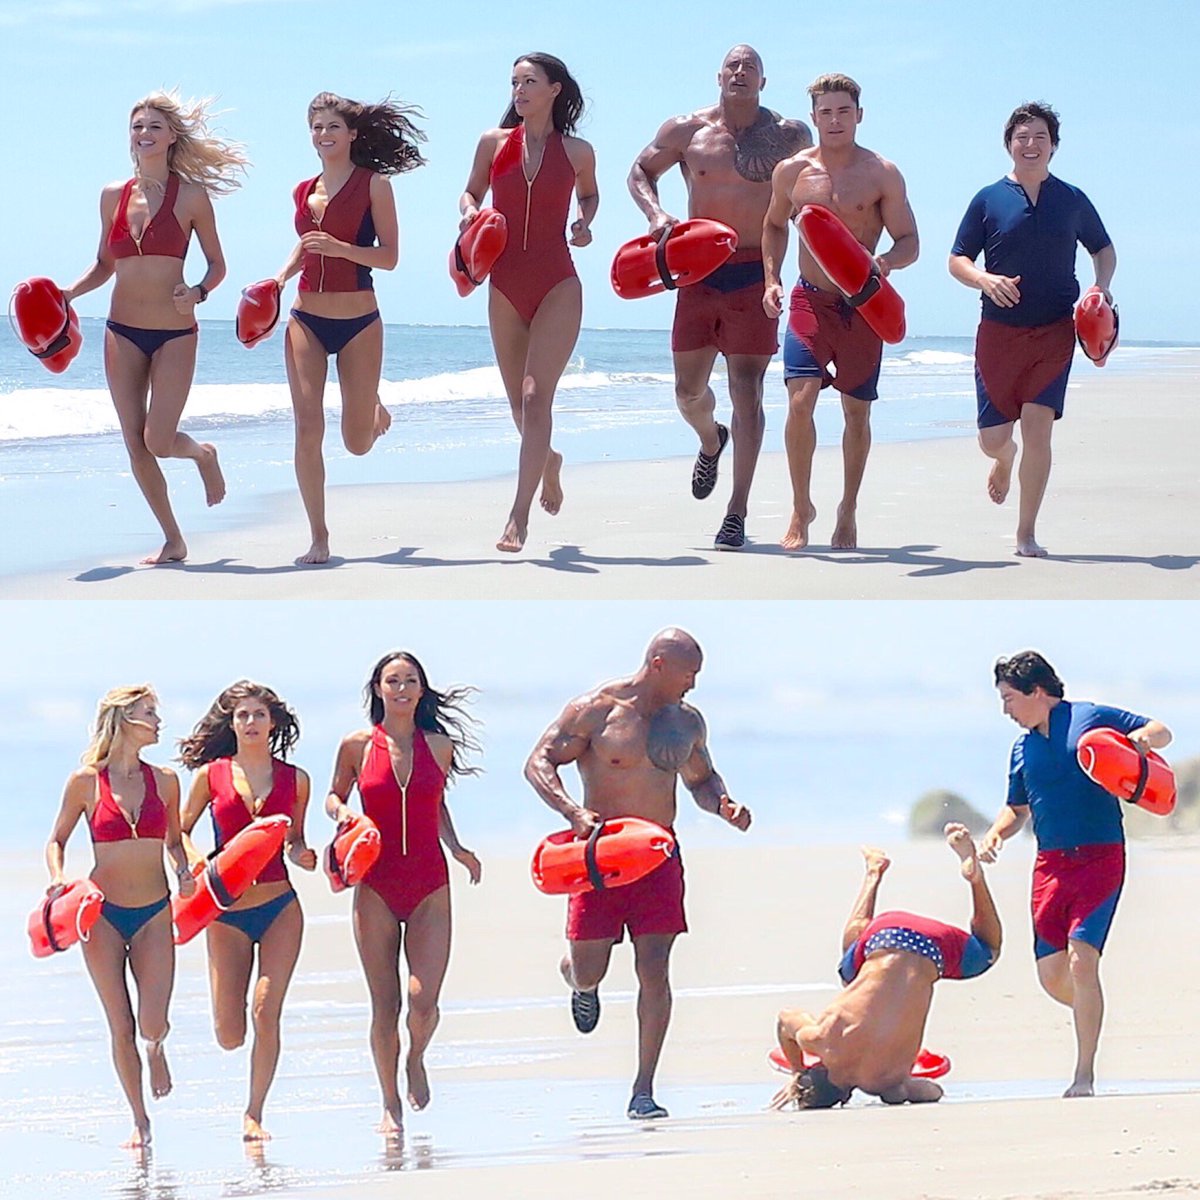 *think cool thoughts*
run cool- hit em w/ that COOL #Baywatch run...
Oh yeah, Feelin it
*think coo- AGH WTF #notcool https://t.co/XrbvPhCoGC